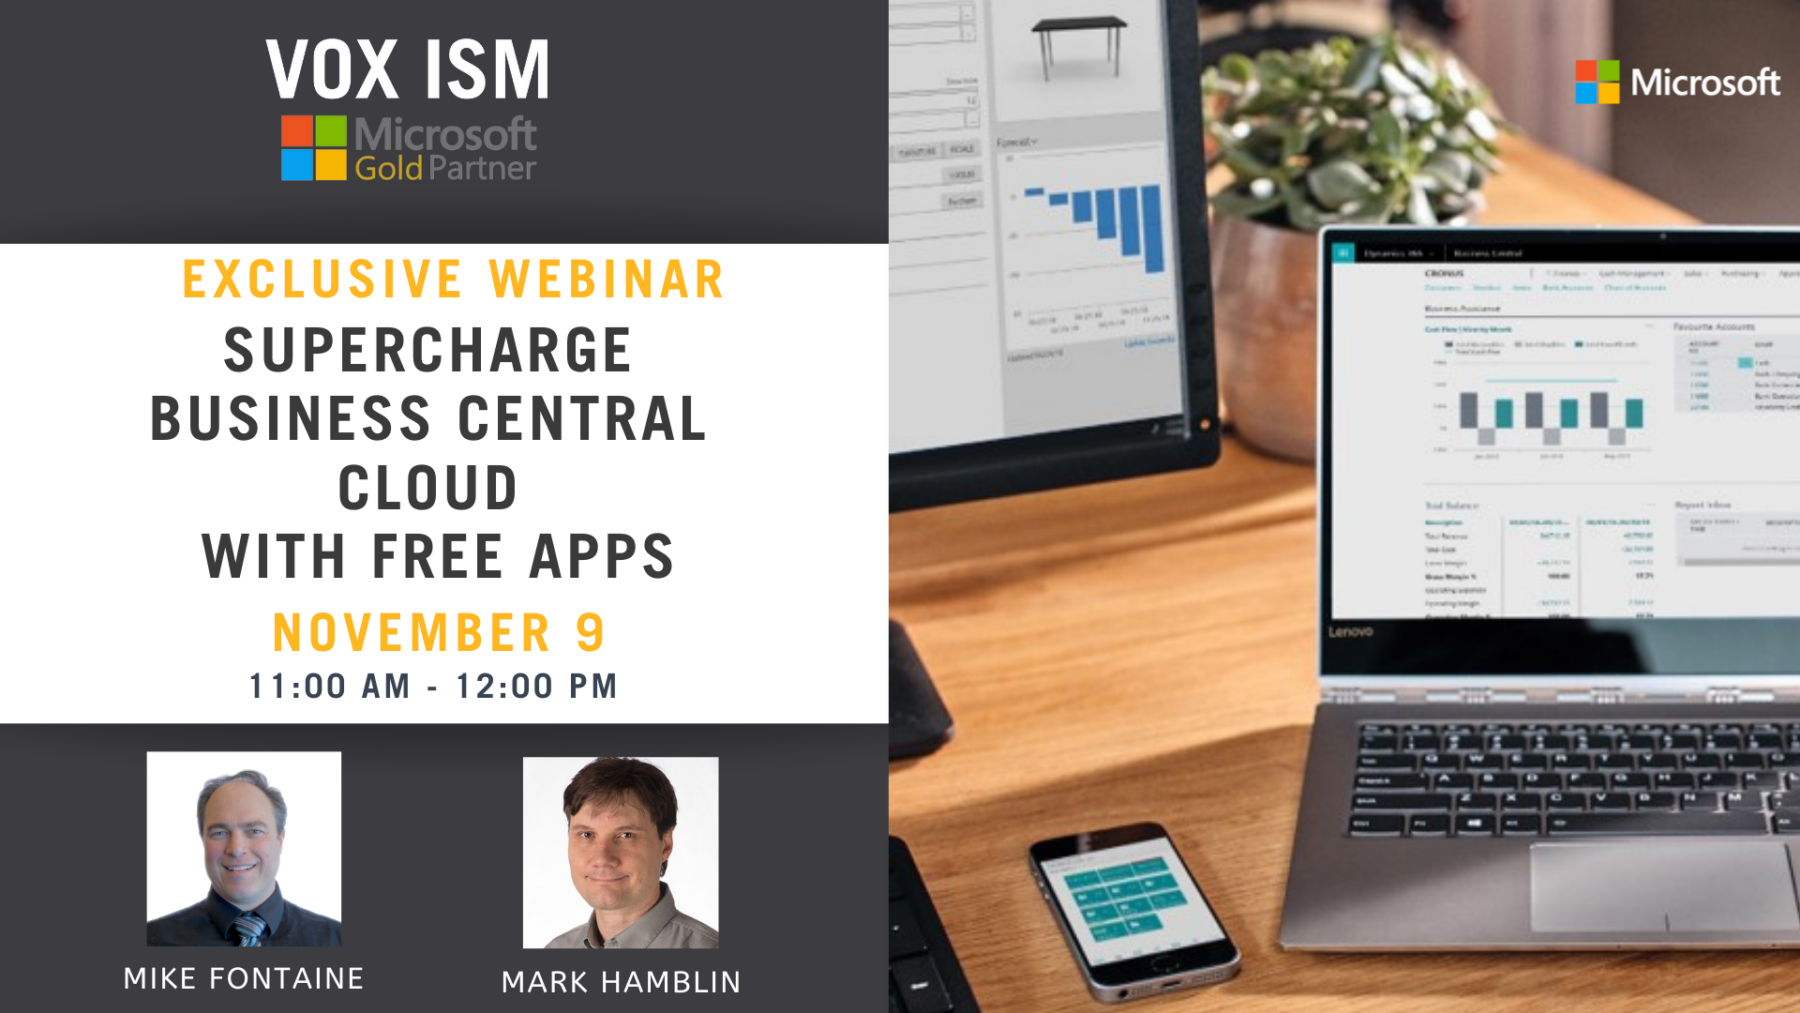 Supercharge Business Central Cloud with Free Apps